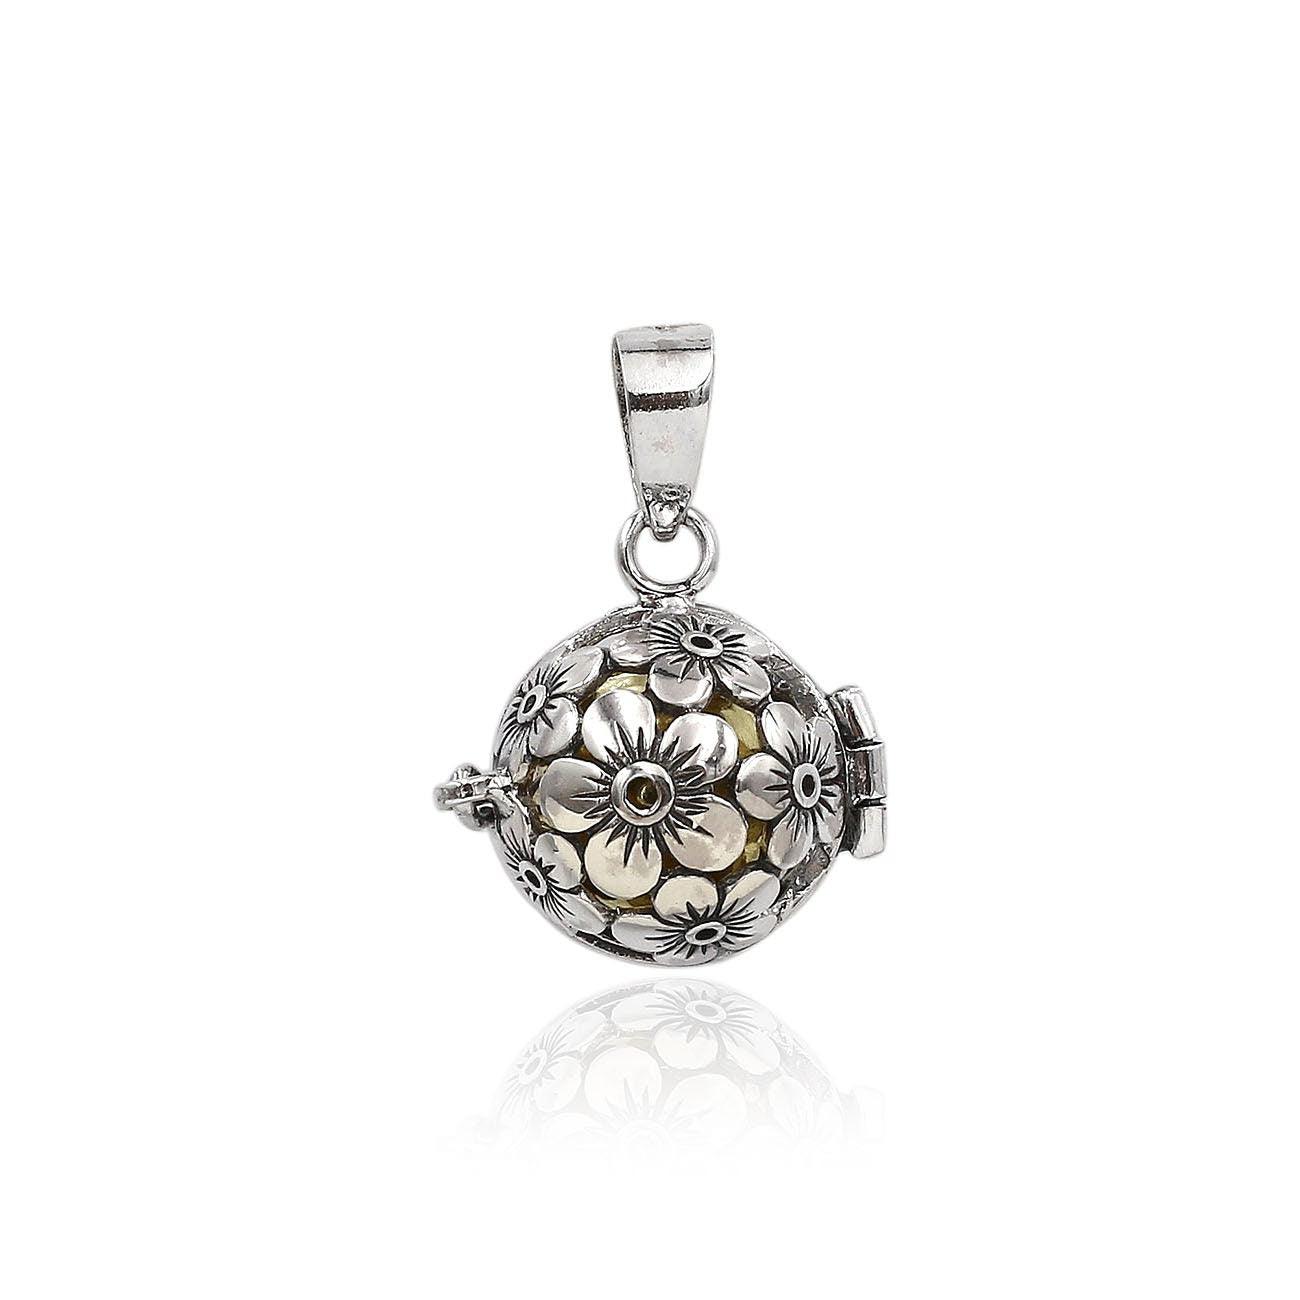 Floral Design Harmony Ball Pendant, Chime Ball, Angel Caller, Bola Necklace Pendant in 925 Sterling Silver with Chain - 2.5 Cm - Inspiring Jewellery